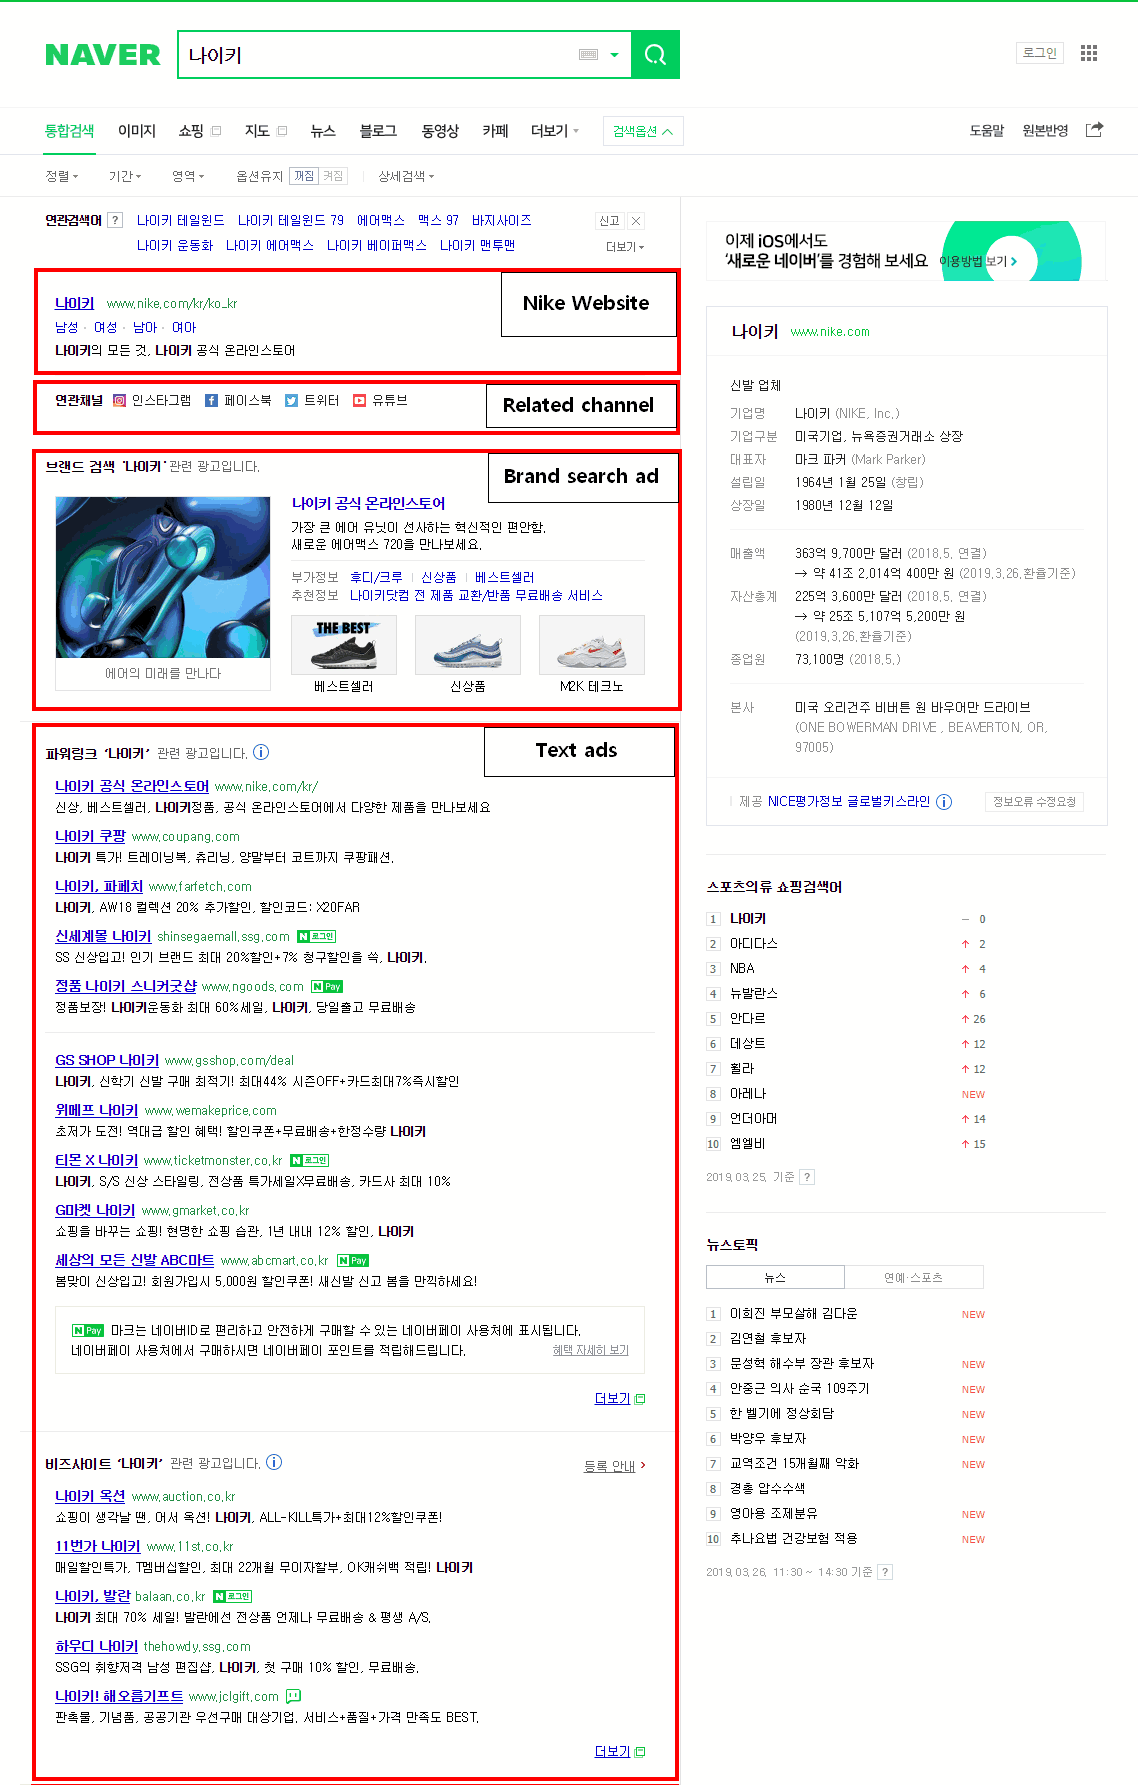 Naver Ads: SERP Example